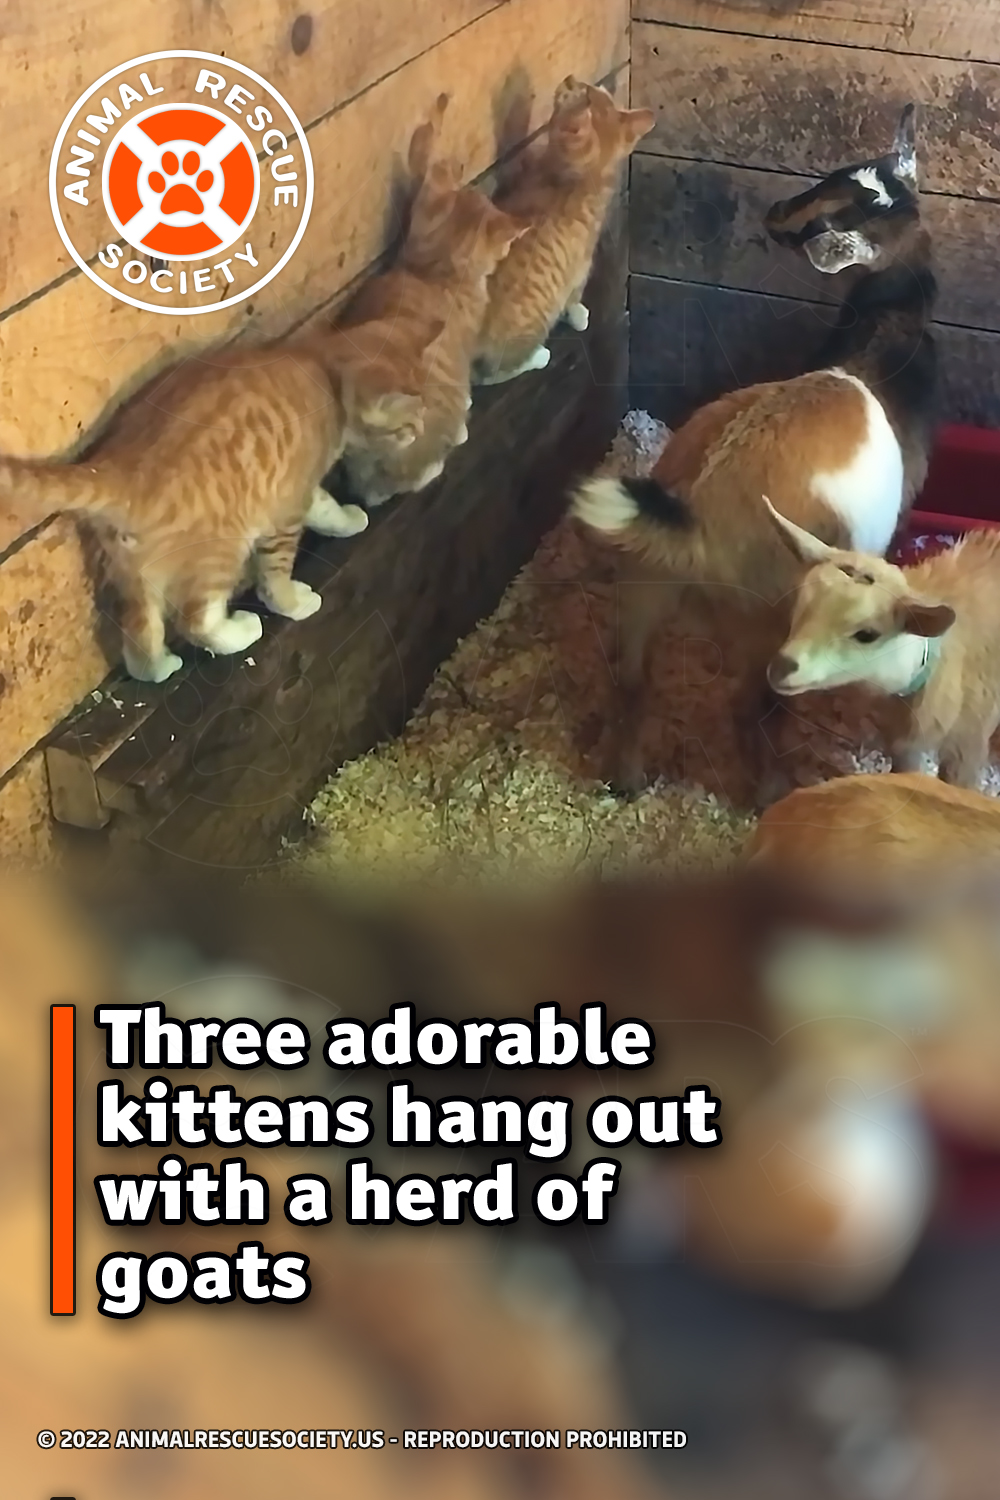 Three adorable kittens hang out with a herd of goats